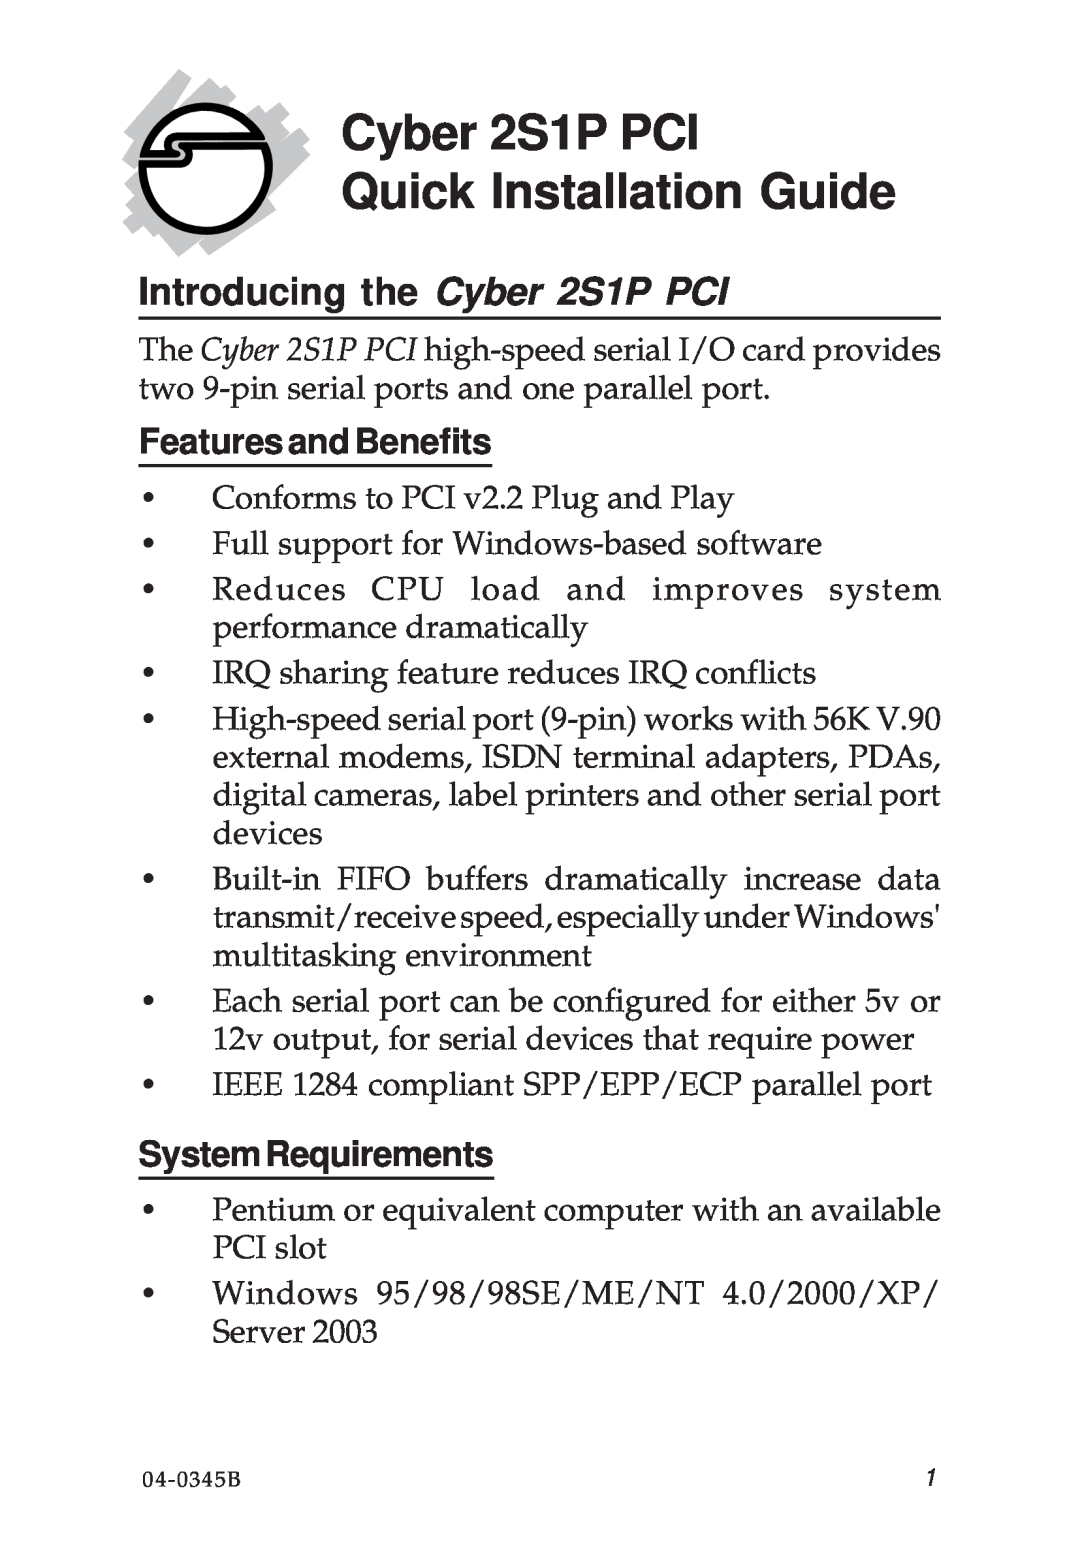 SIIG manual Introducing the Cyber 2S1P PCI, Features and Benefits, SystemRequirements 